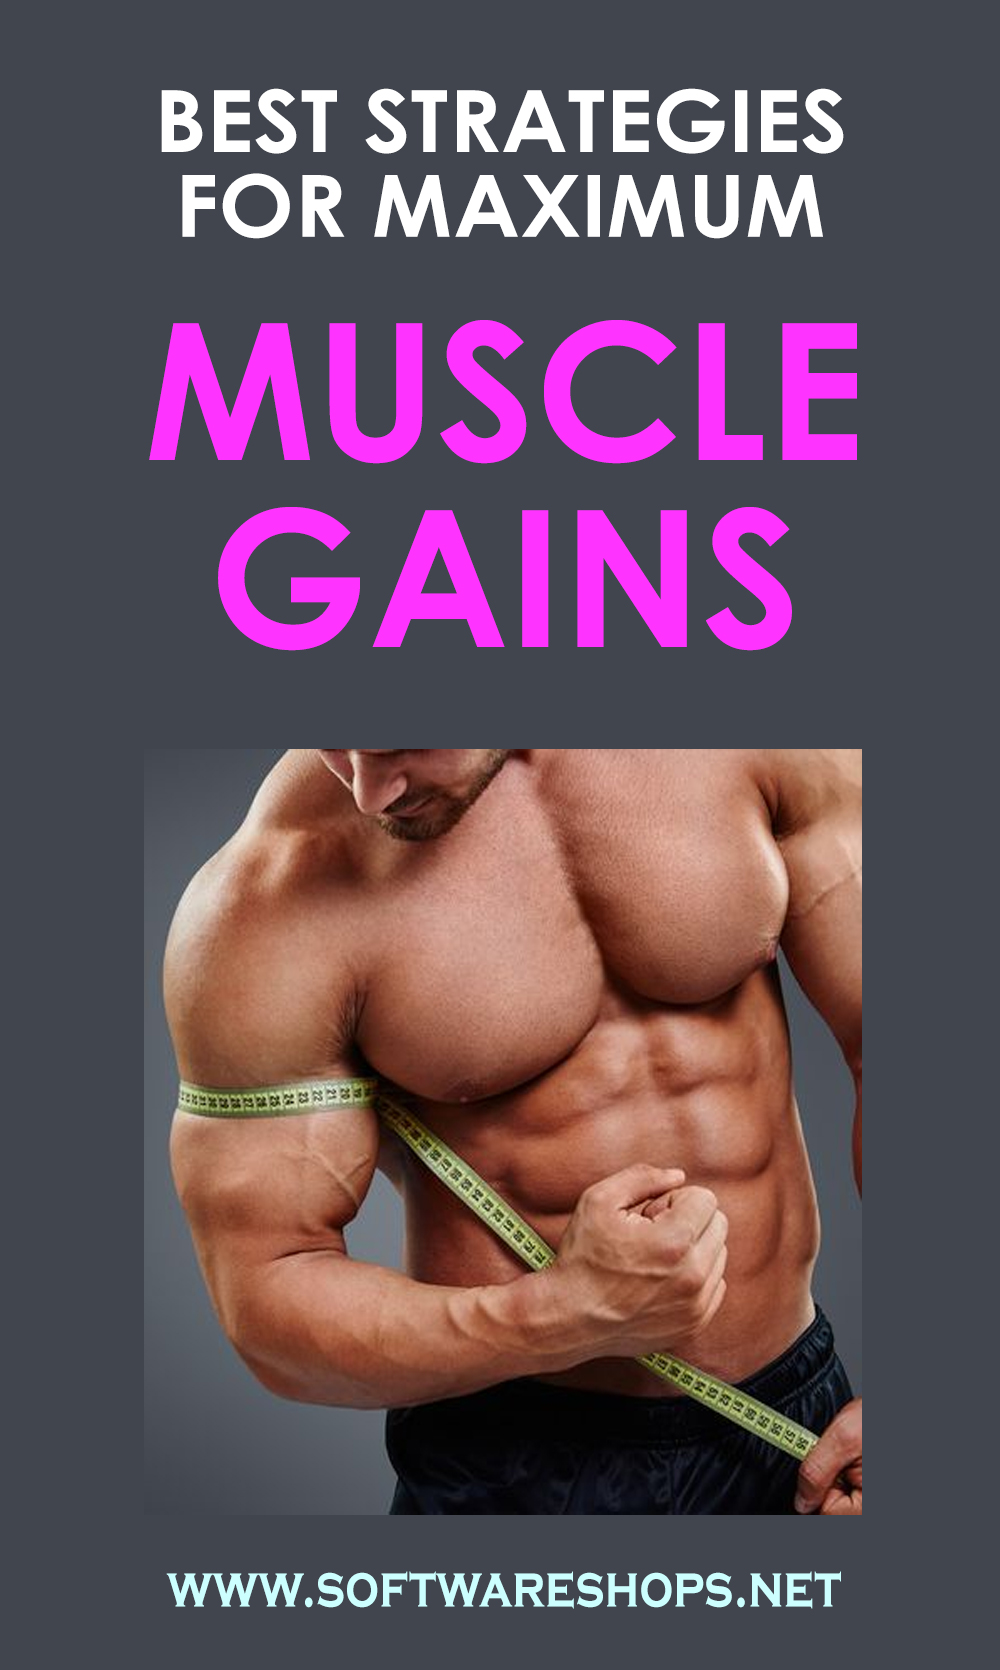 Best Strategies For Maximum Muscle Gains